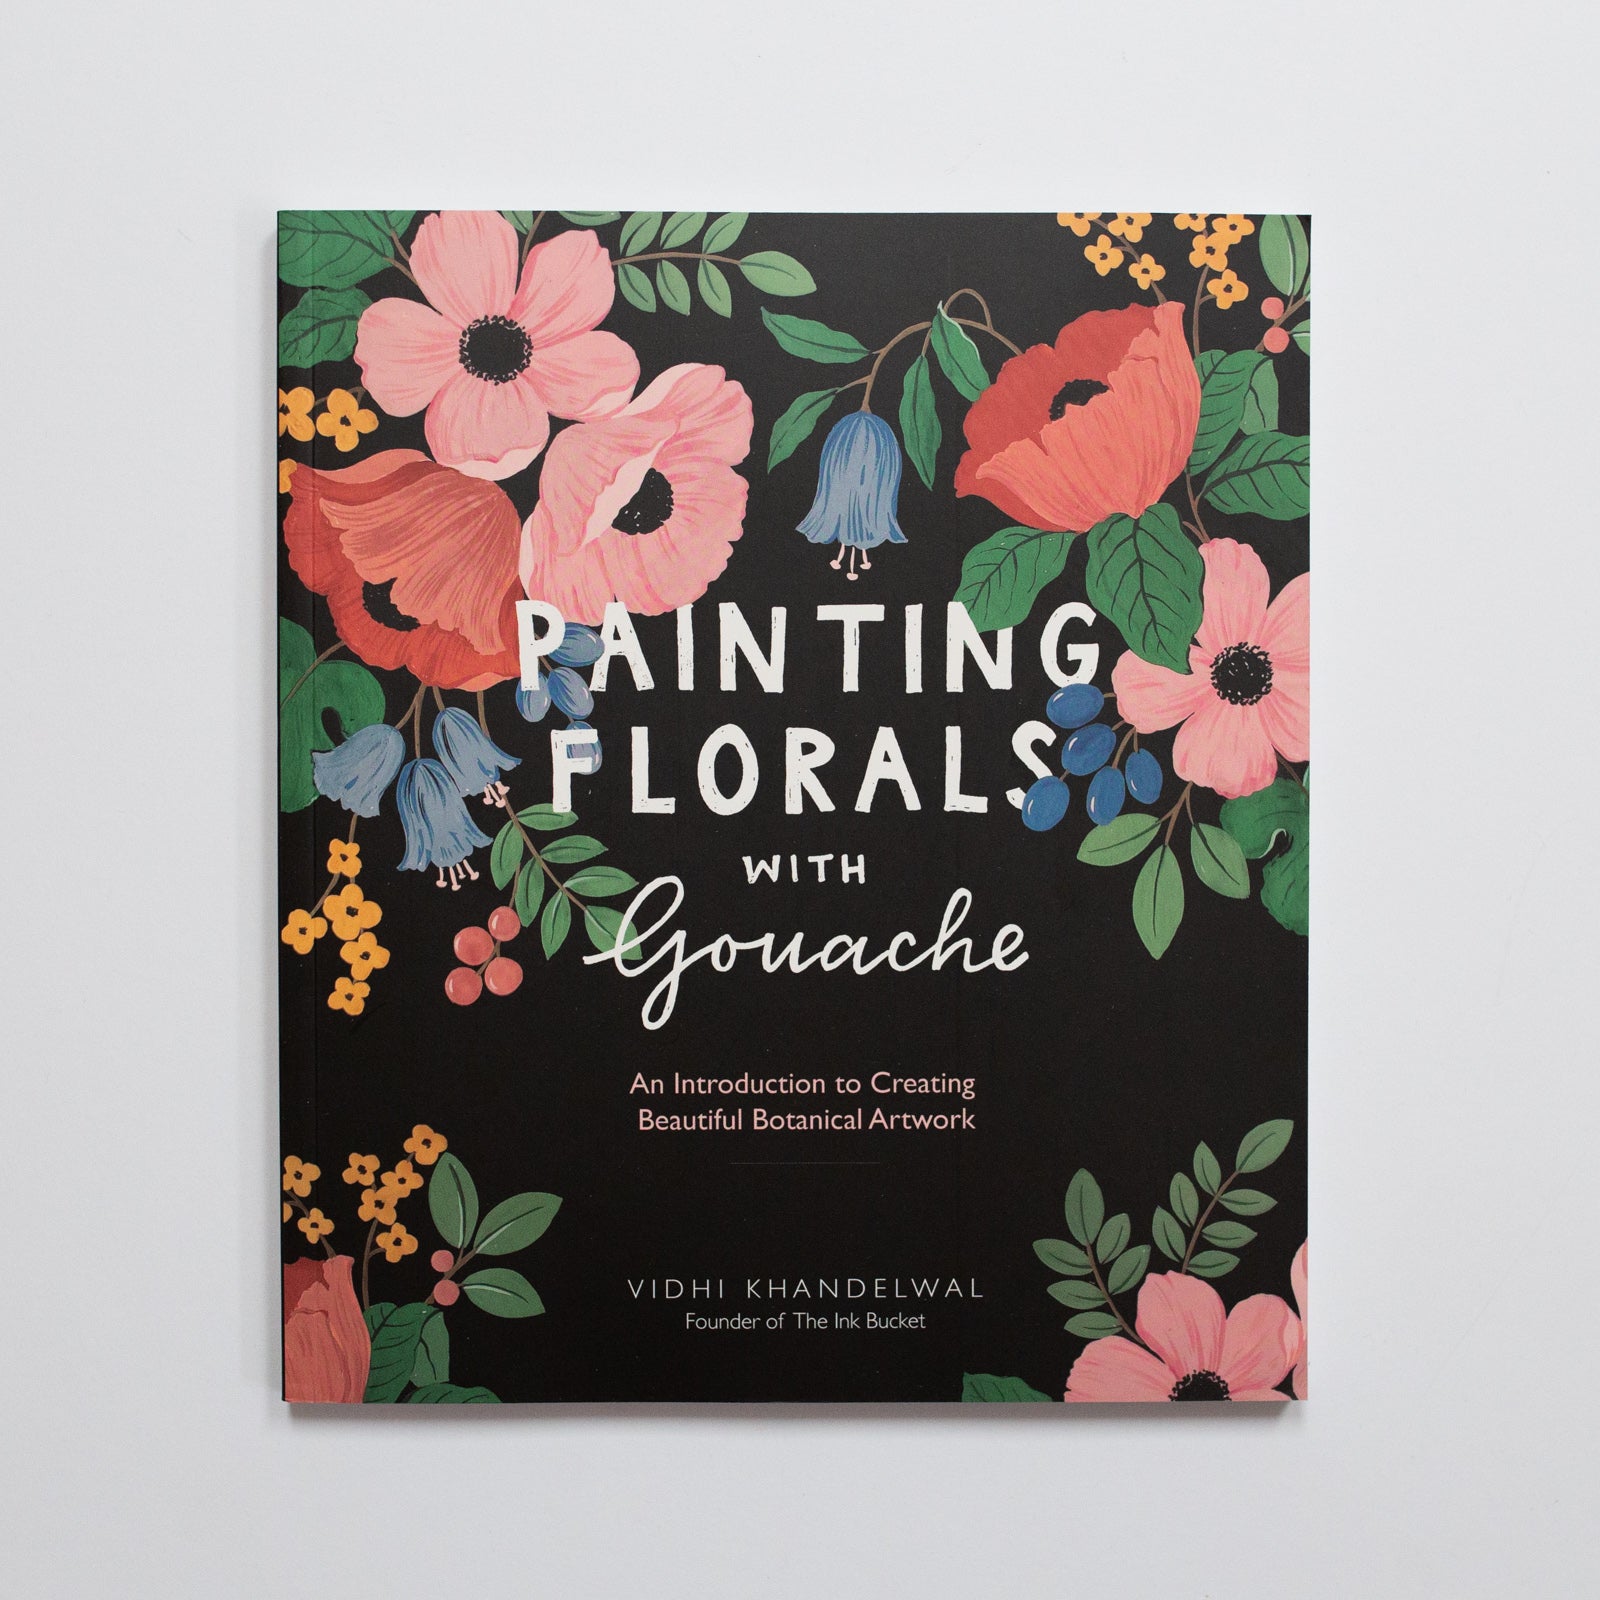 Painting Florals with gouache by Vidhi Khandelwal